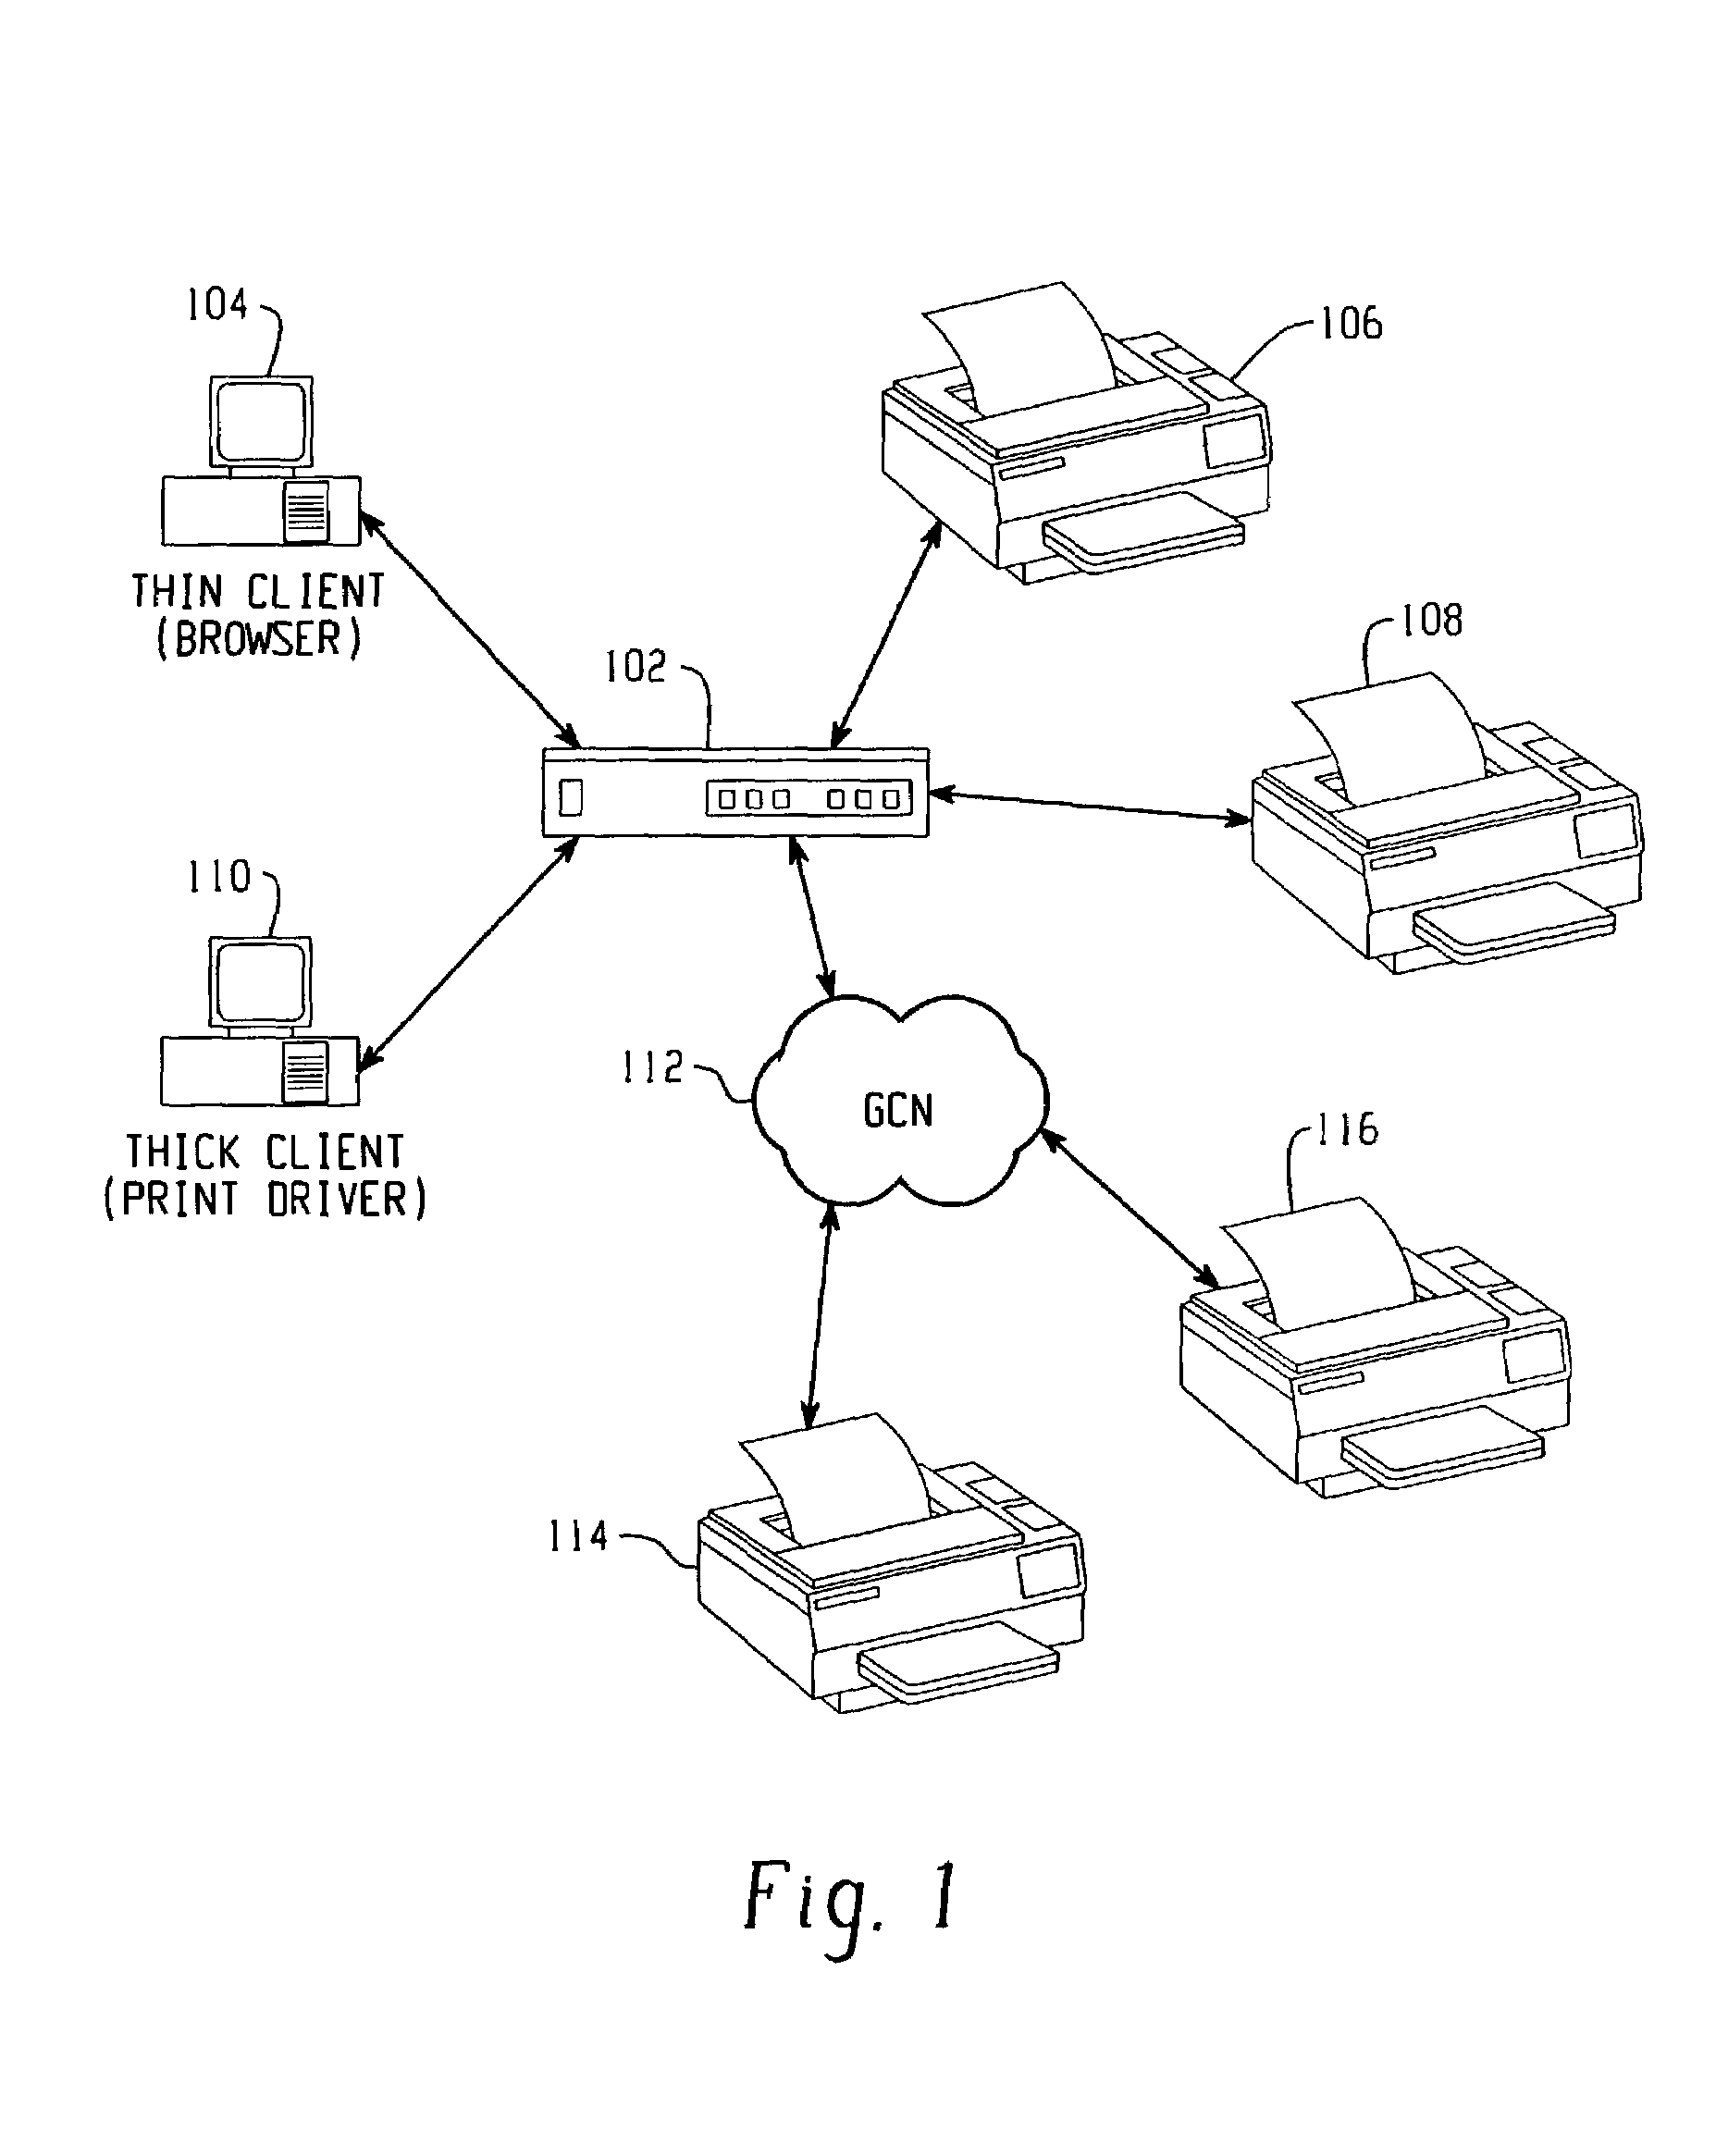 Method and system for preserving user identification when generating image data from a remote location